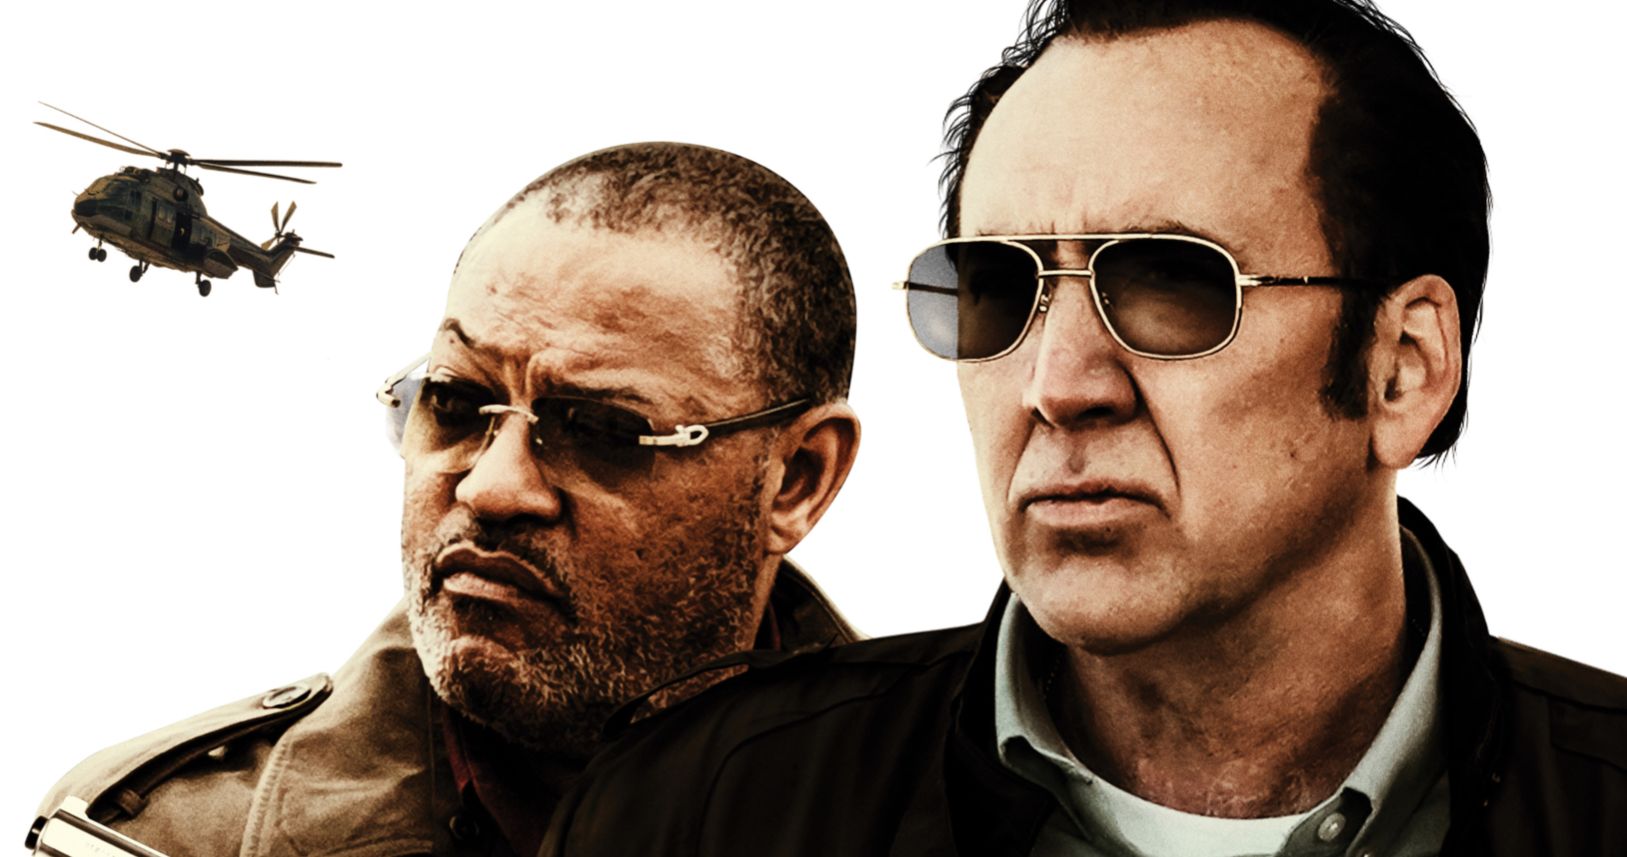 Running with the Devil Trailer Teams Nicolas Cage &amp; Laurence Fishburne in Cocaine Thriller